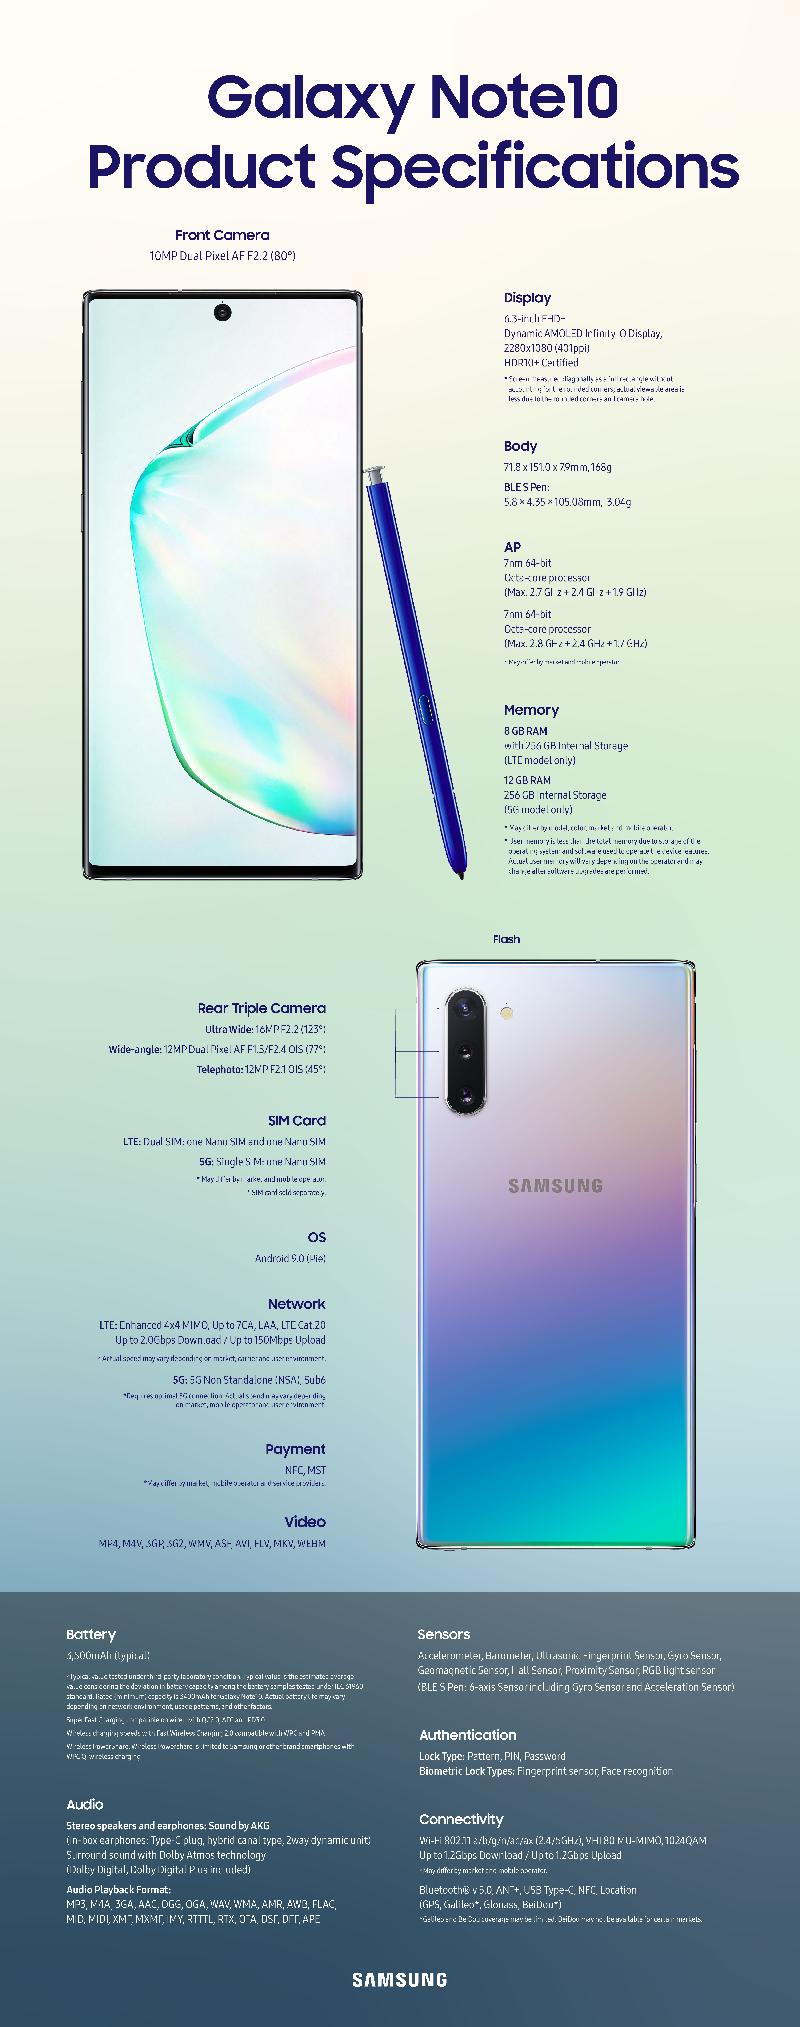 Galaxy_Note10_Product_Specifications-11.jpg